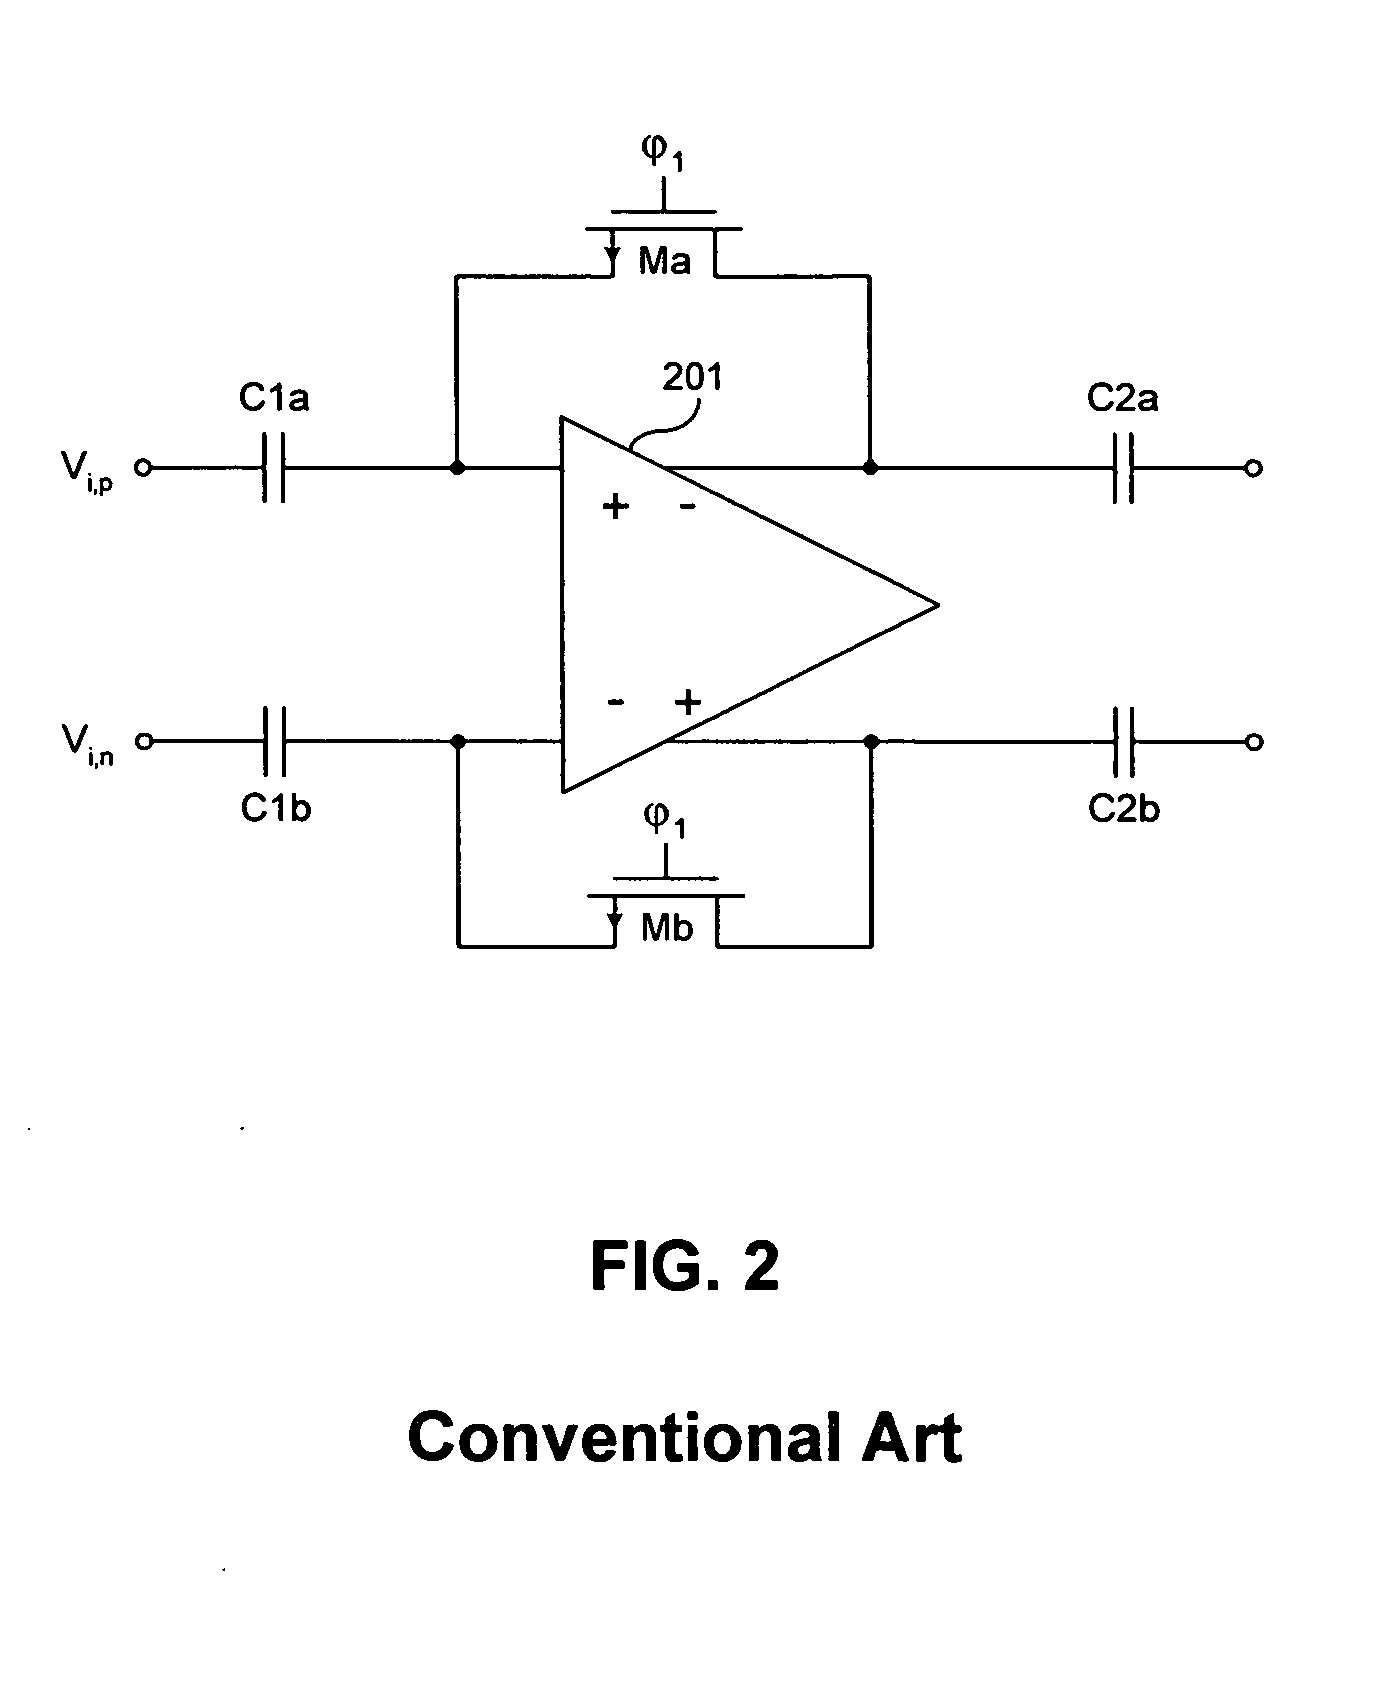 Multiplexer with low parasitic capacitance effects